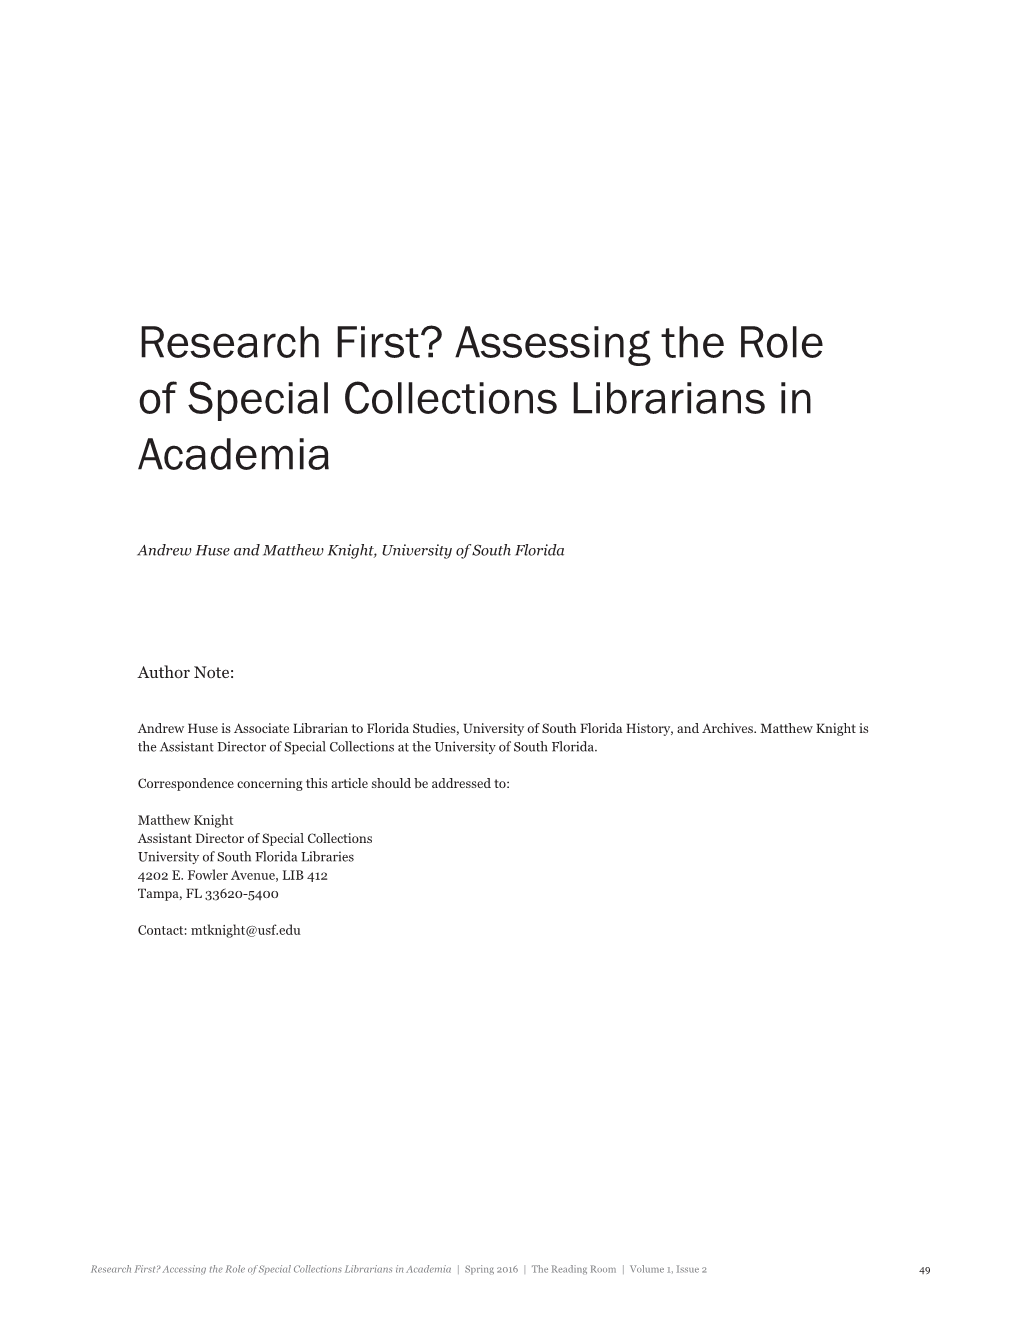 Research First? Assessing the Role of Special Collections Librarians in Academia